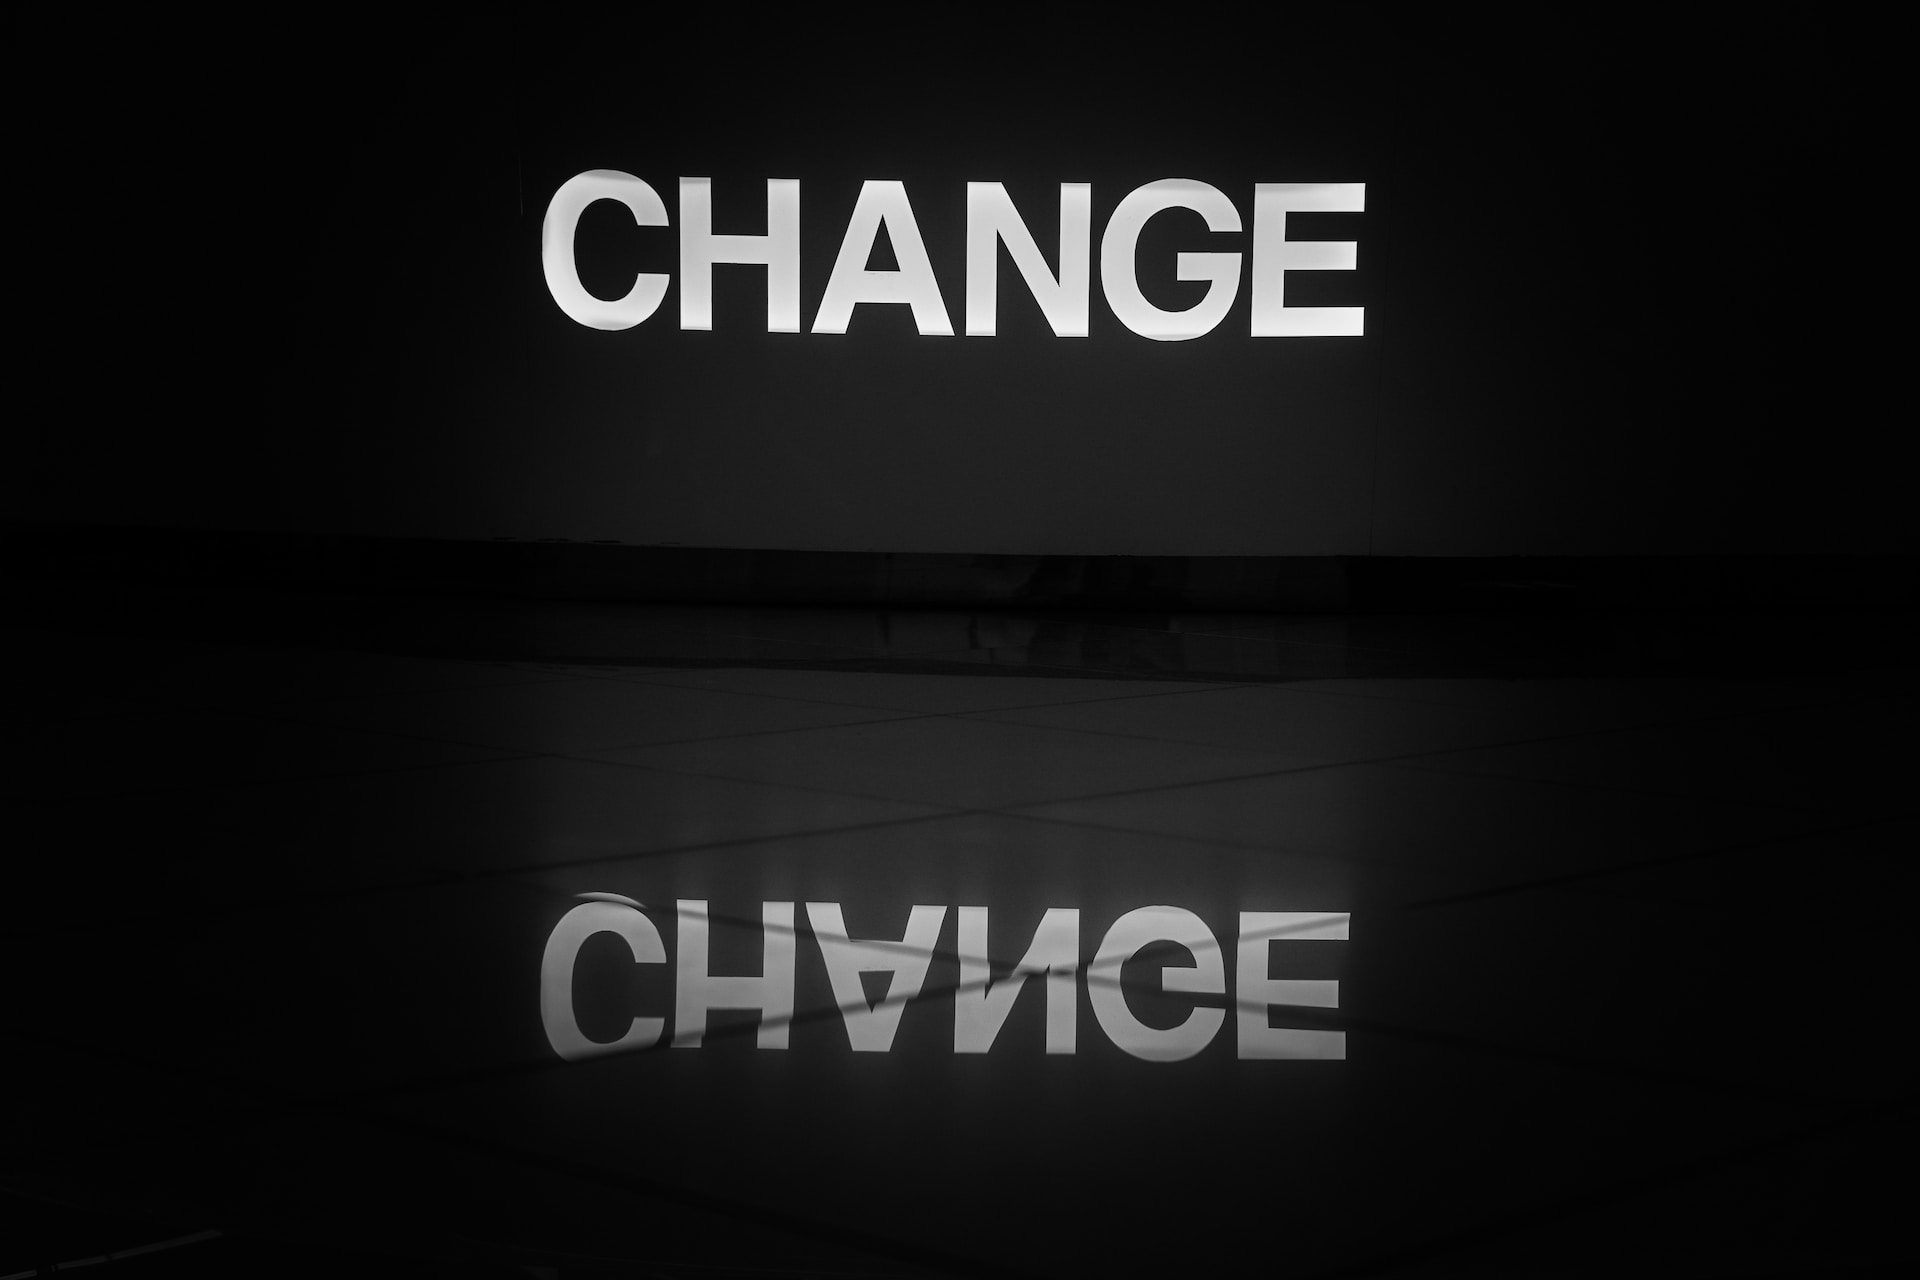 A black and white photo of a sign that says "change"